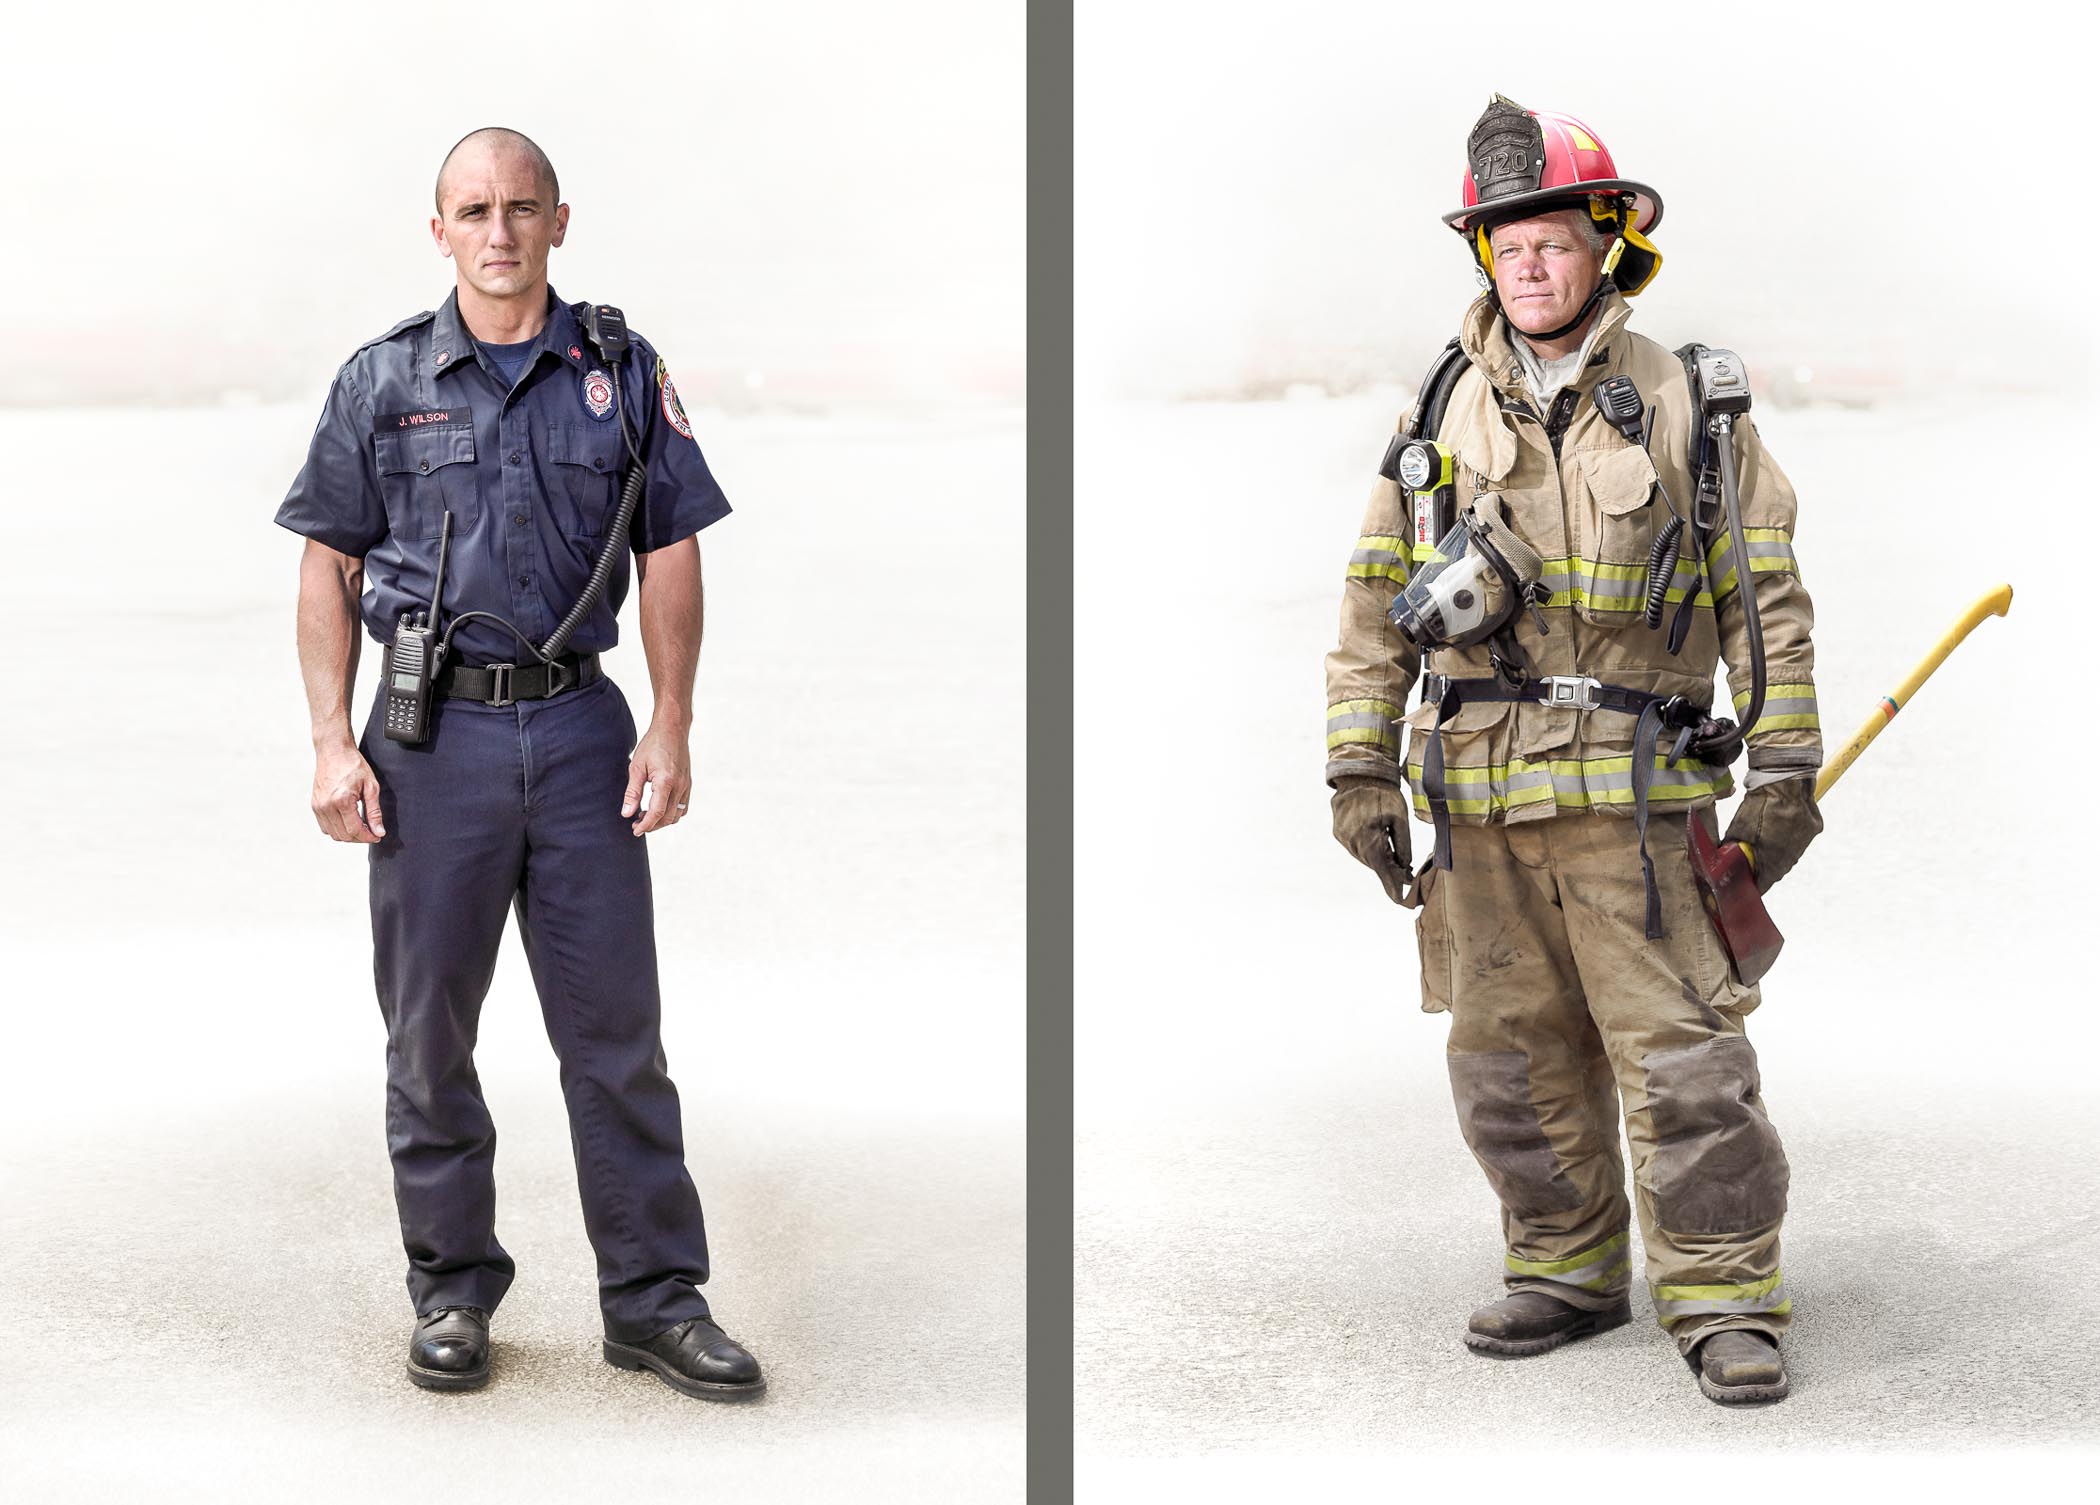 Firemen Pose for Portrait Photographer Gregory Campbell